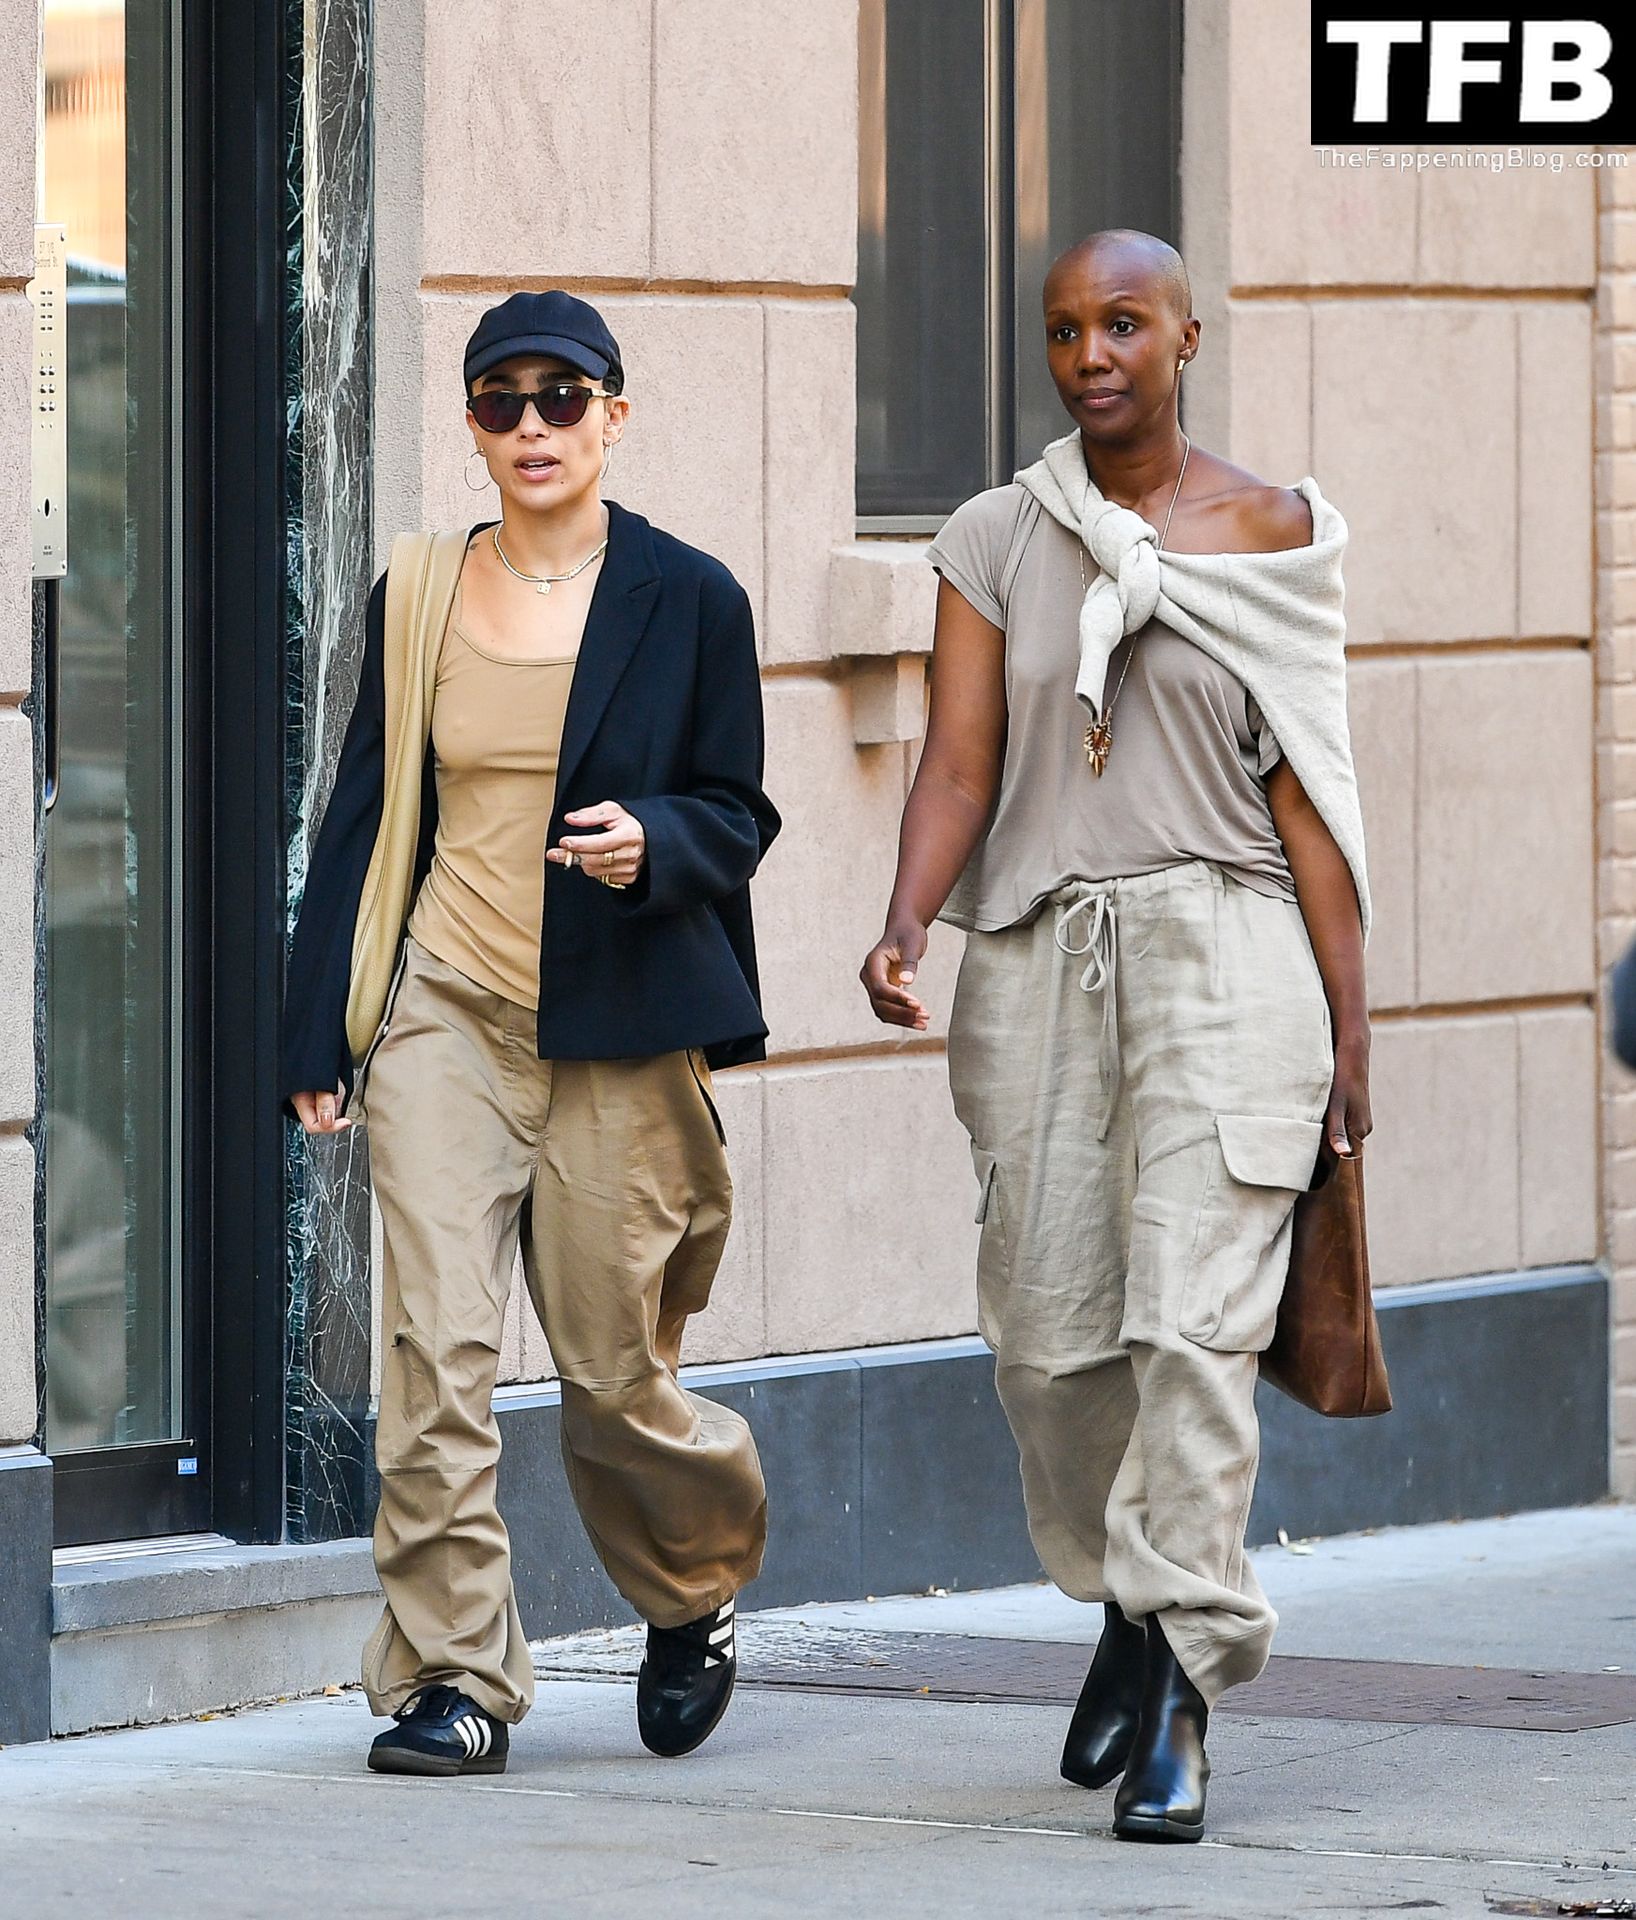 Zoe Kravitz Sexy Tits The Fappening Blog 1 - Braless Zoe Kravitz Steps Out With a Friend in NYC (13 Photos)